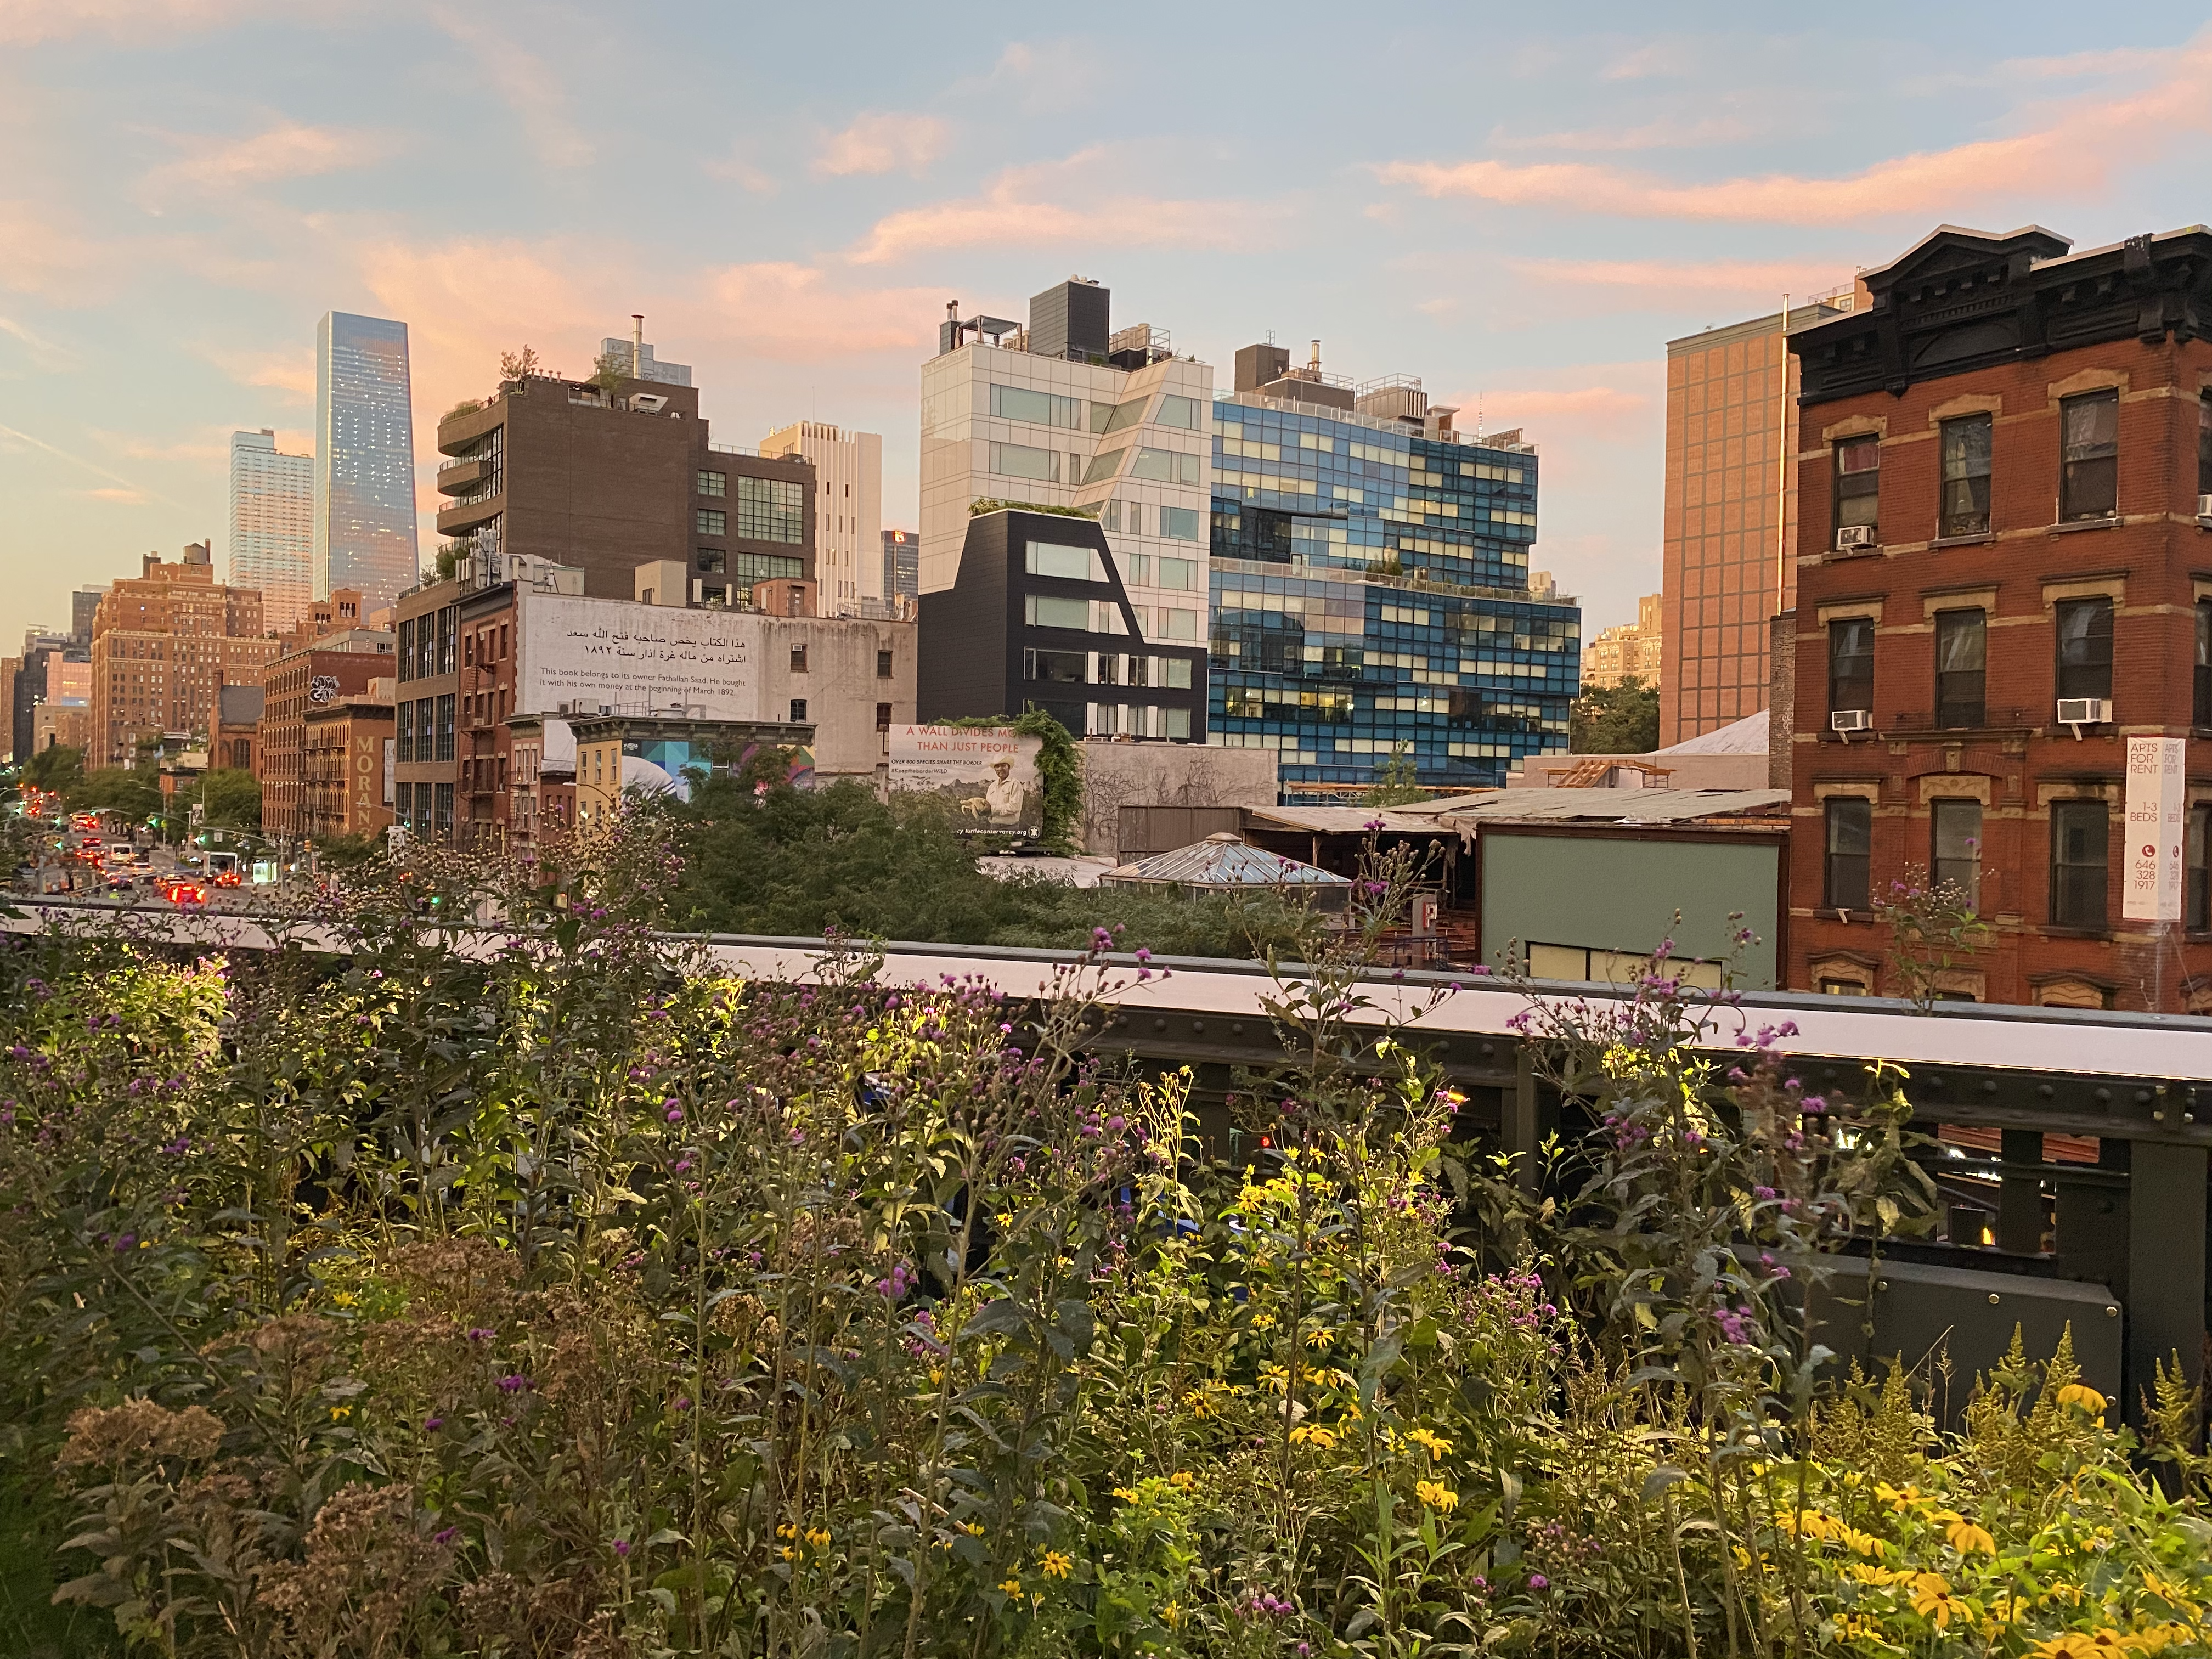 A sunset-view of the Manhattan skyline from the Highline.